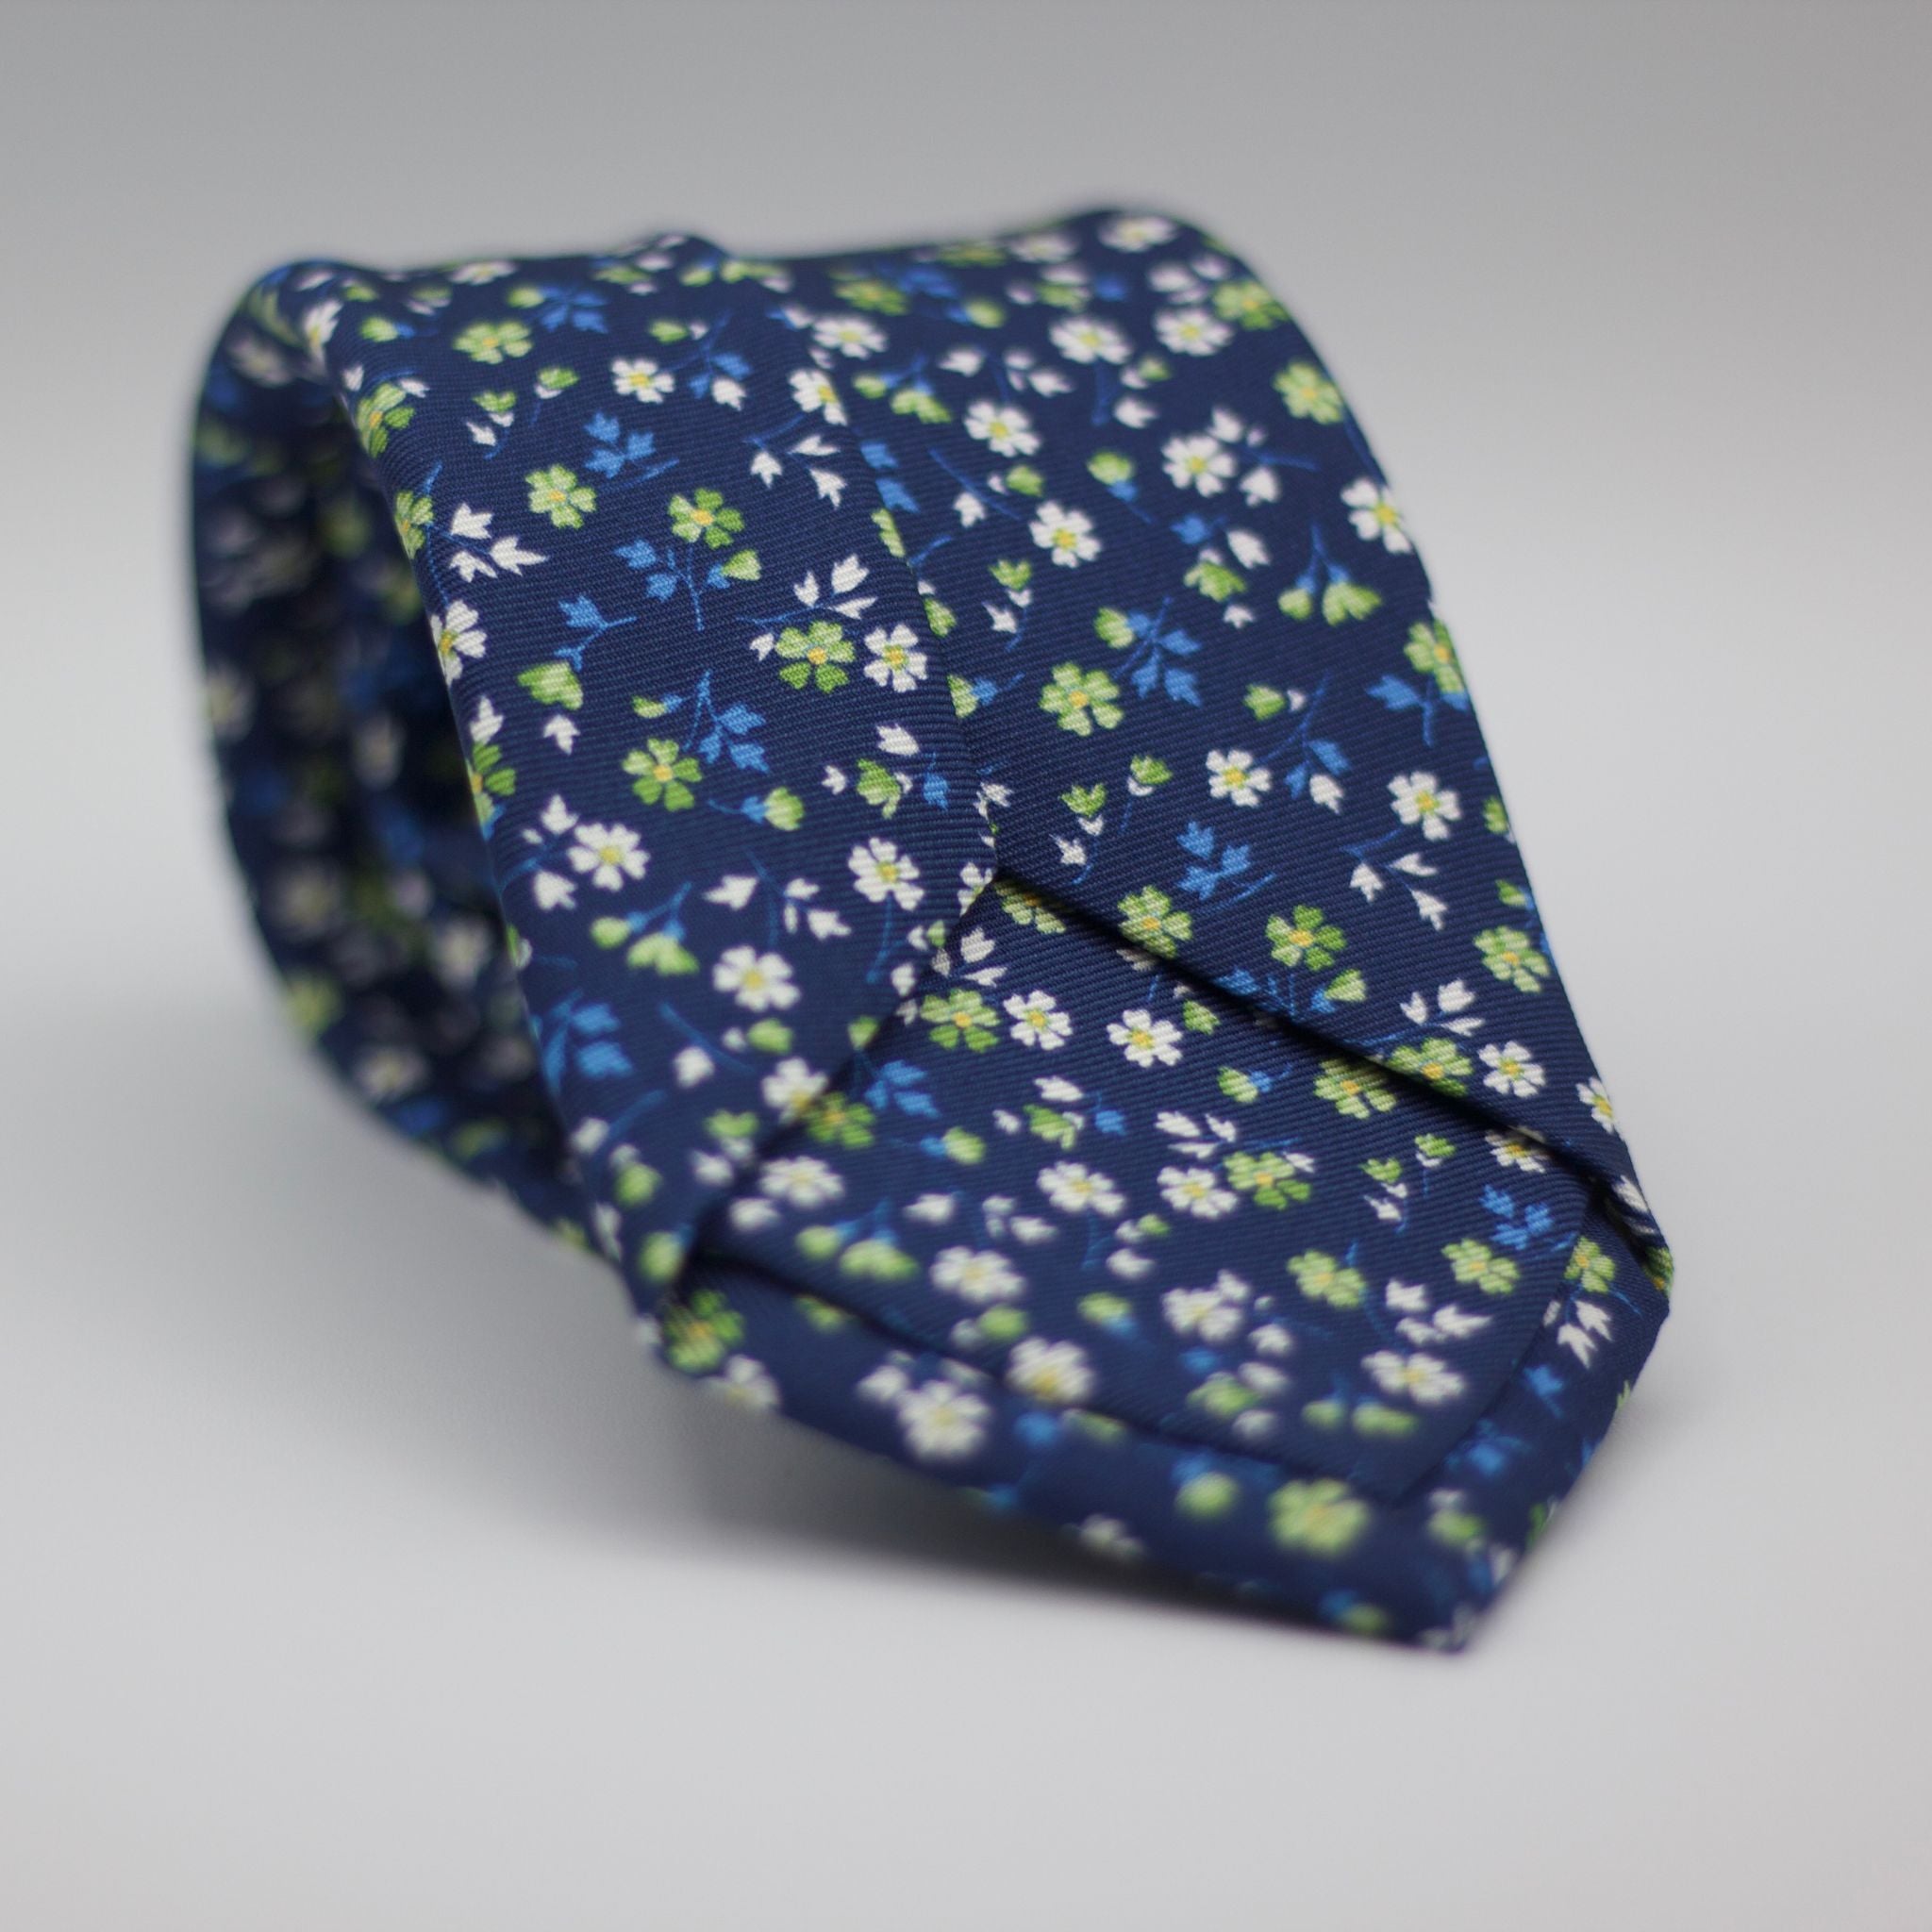 Holliday & Brown for Cruciani & Bella 100% printed Silk Self Tipped Holliday & Brown - Printed Silk -Blue, with White and Green Floral motif tie Handmade in Italy 8 cm x 150 cm #6310